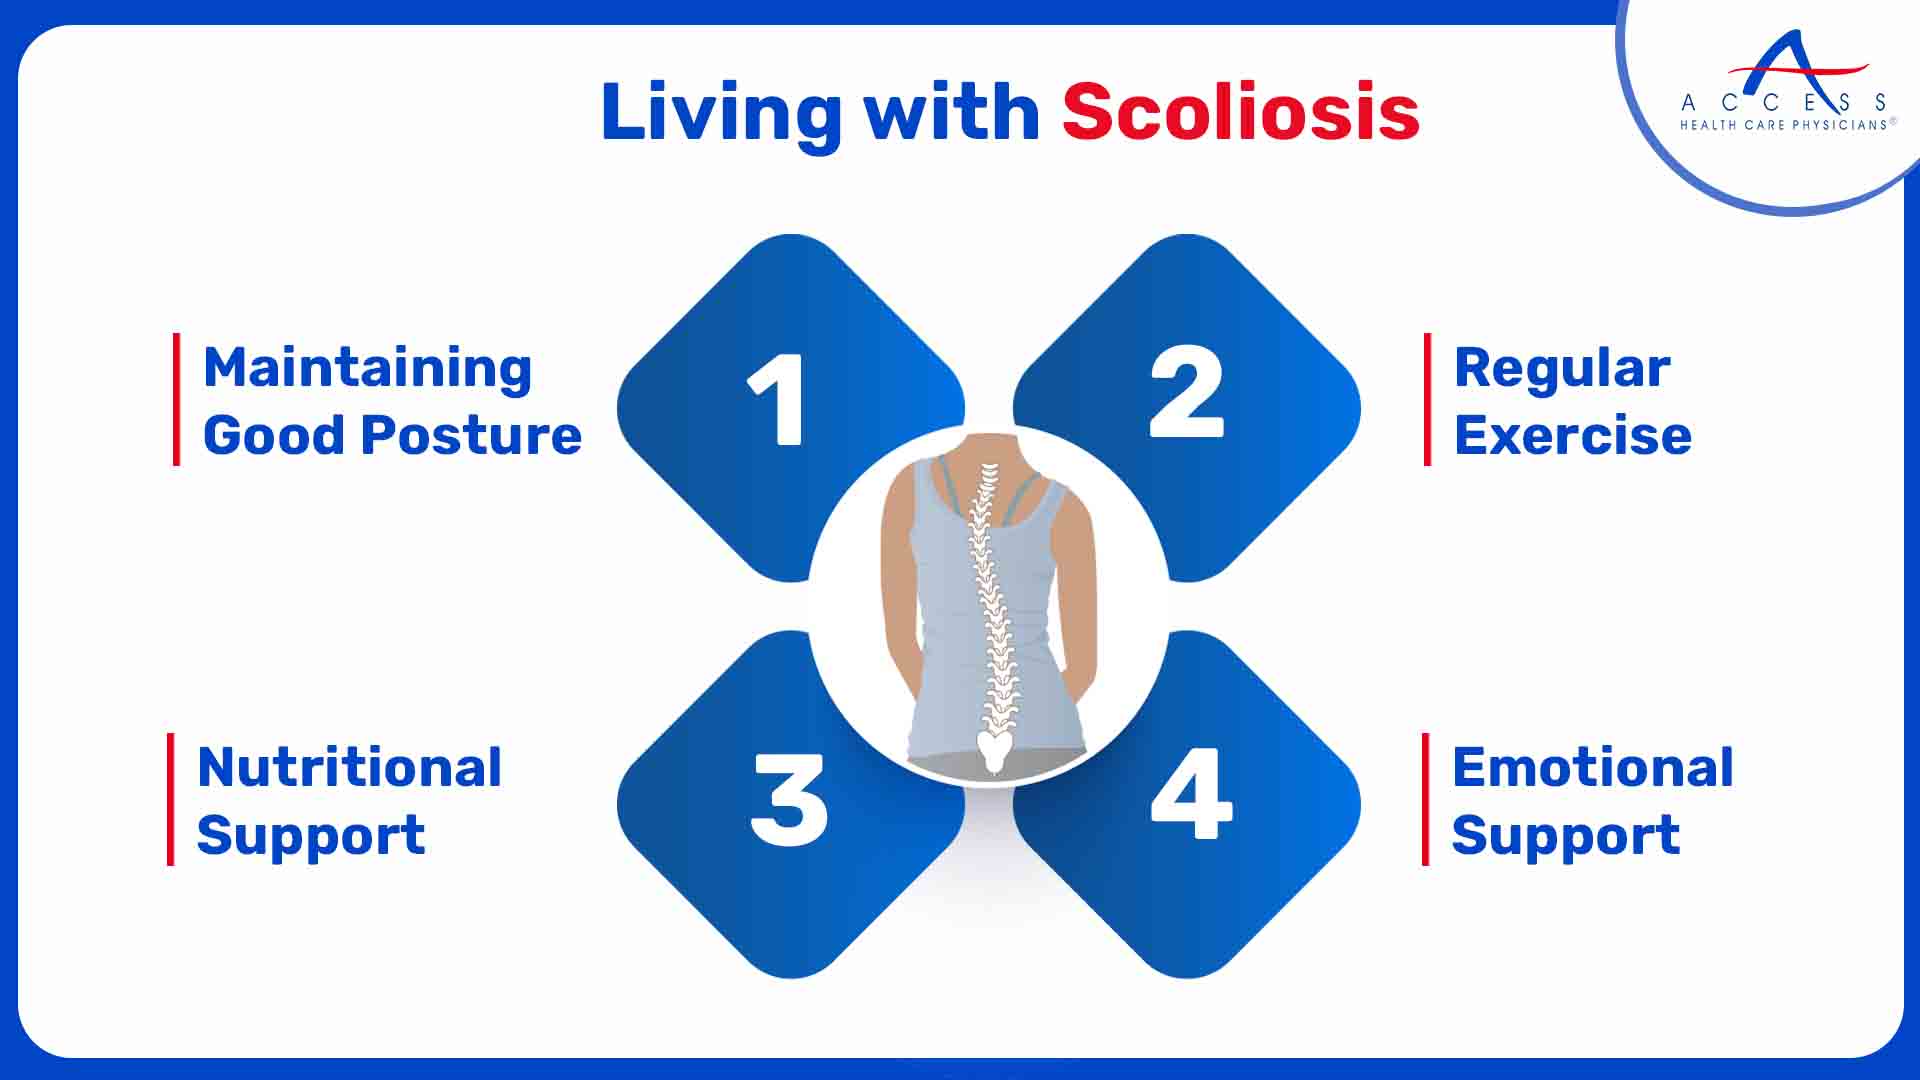 Living with Scoliosis